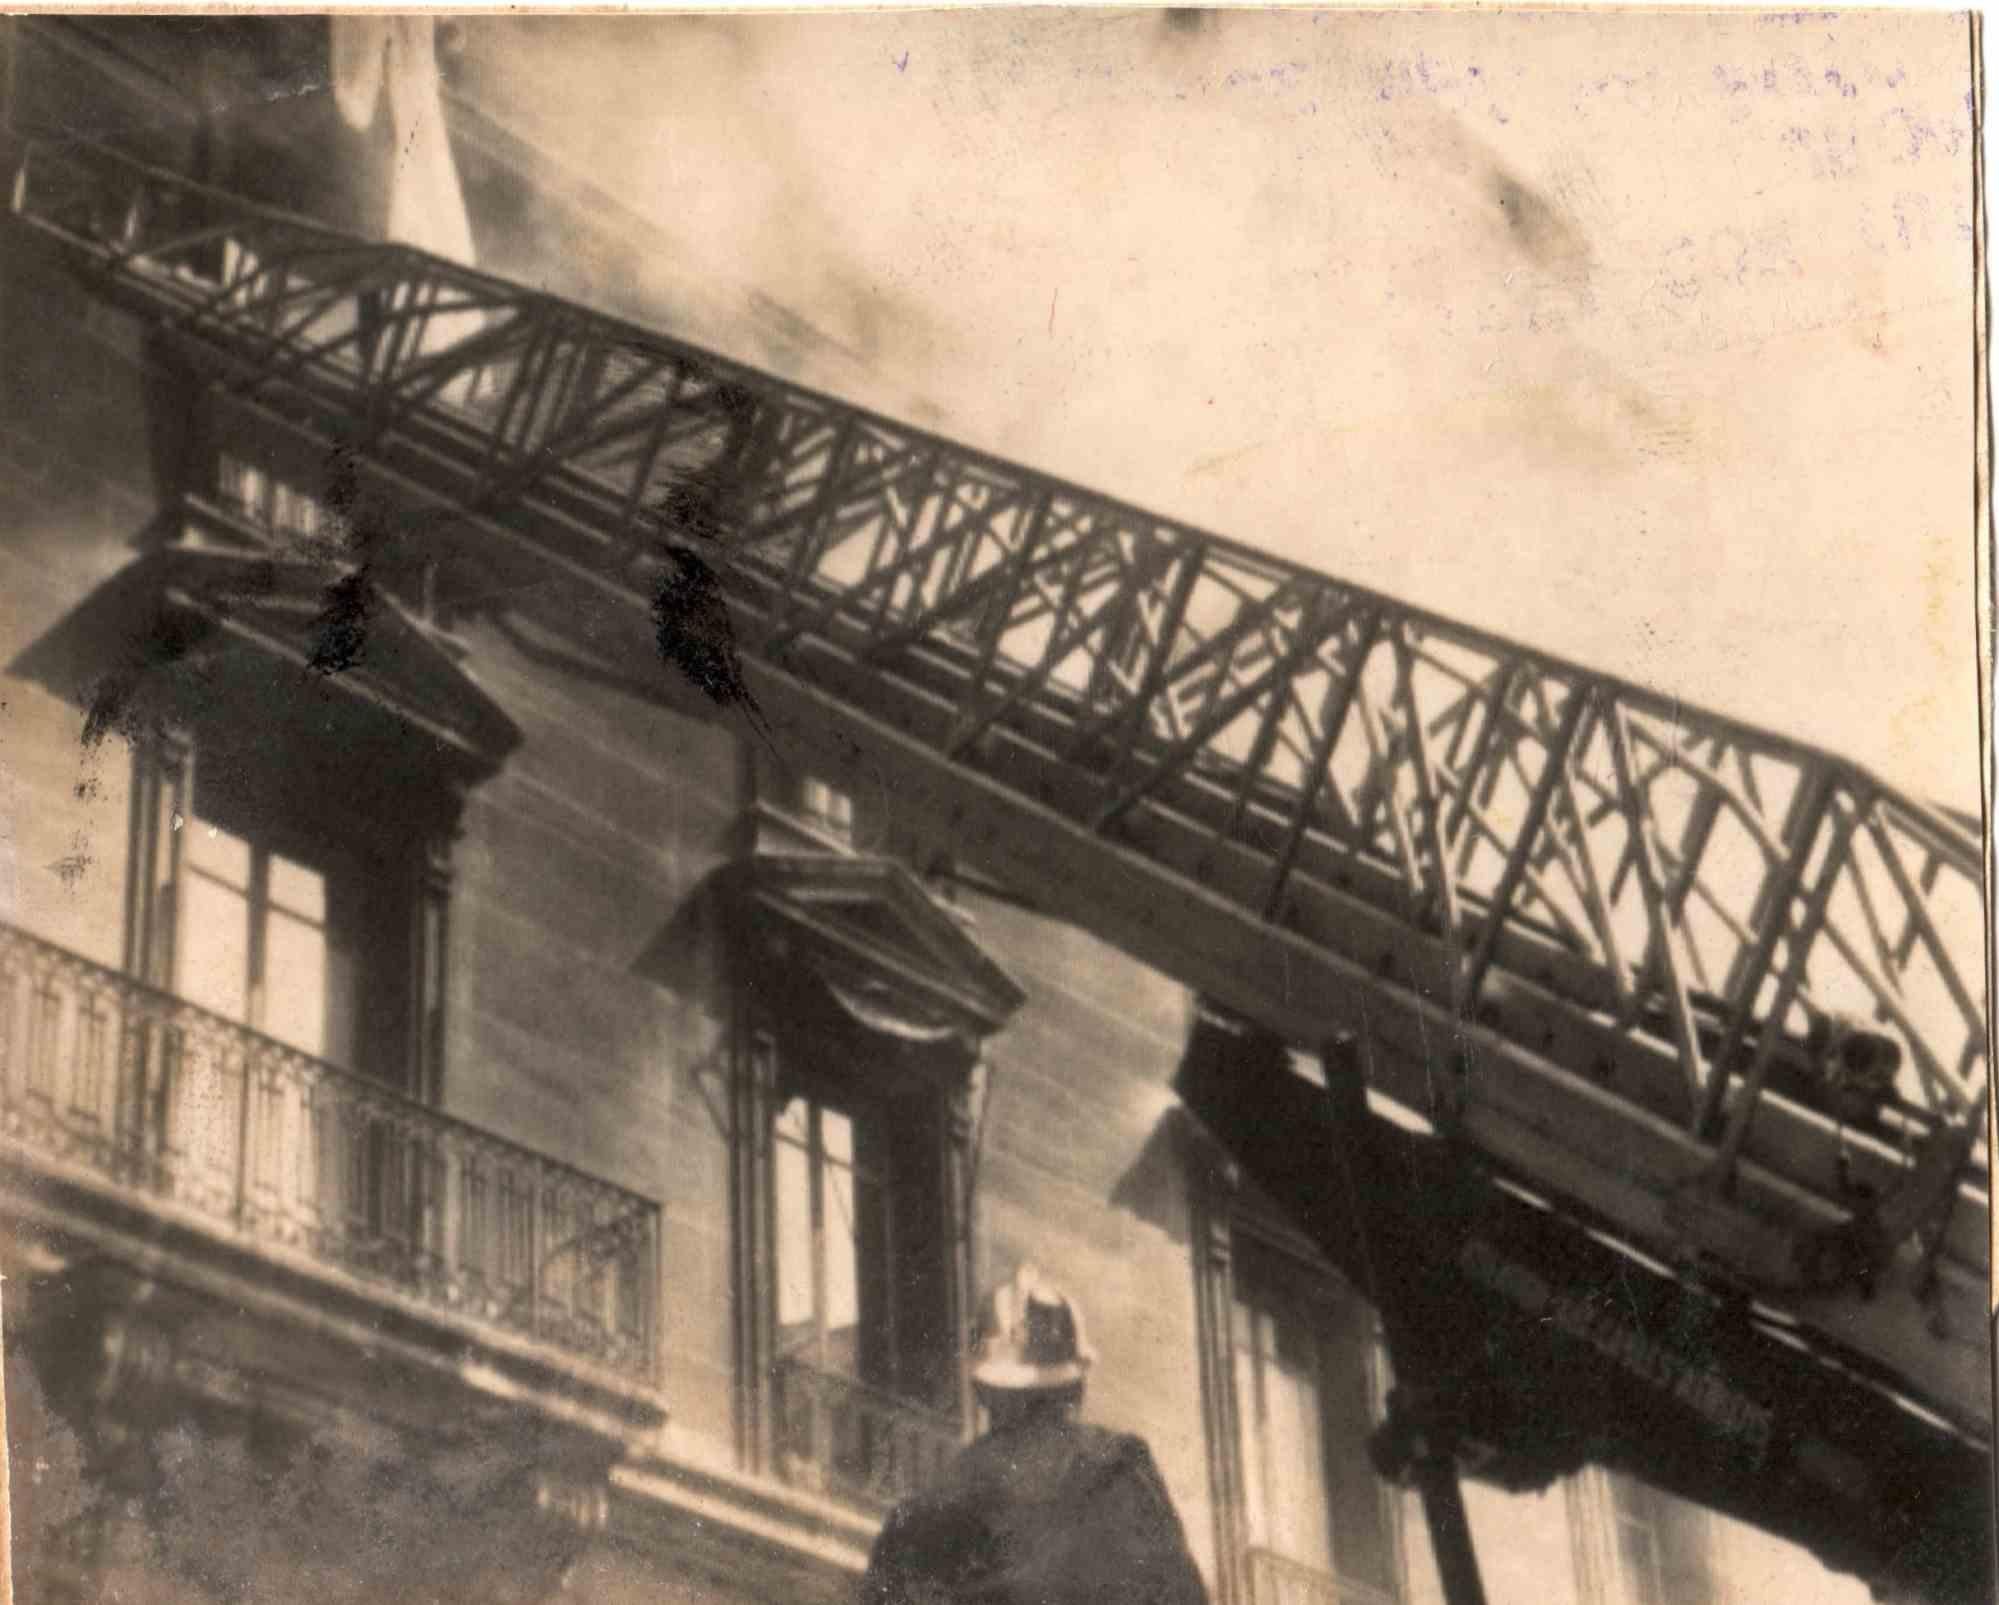 Unknown Figurative Photograph - Burning House - Vintage Photograph - Mid-20 Century